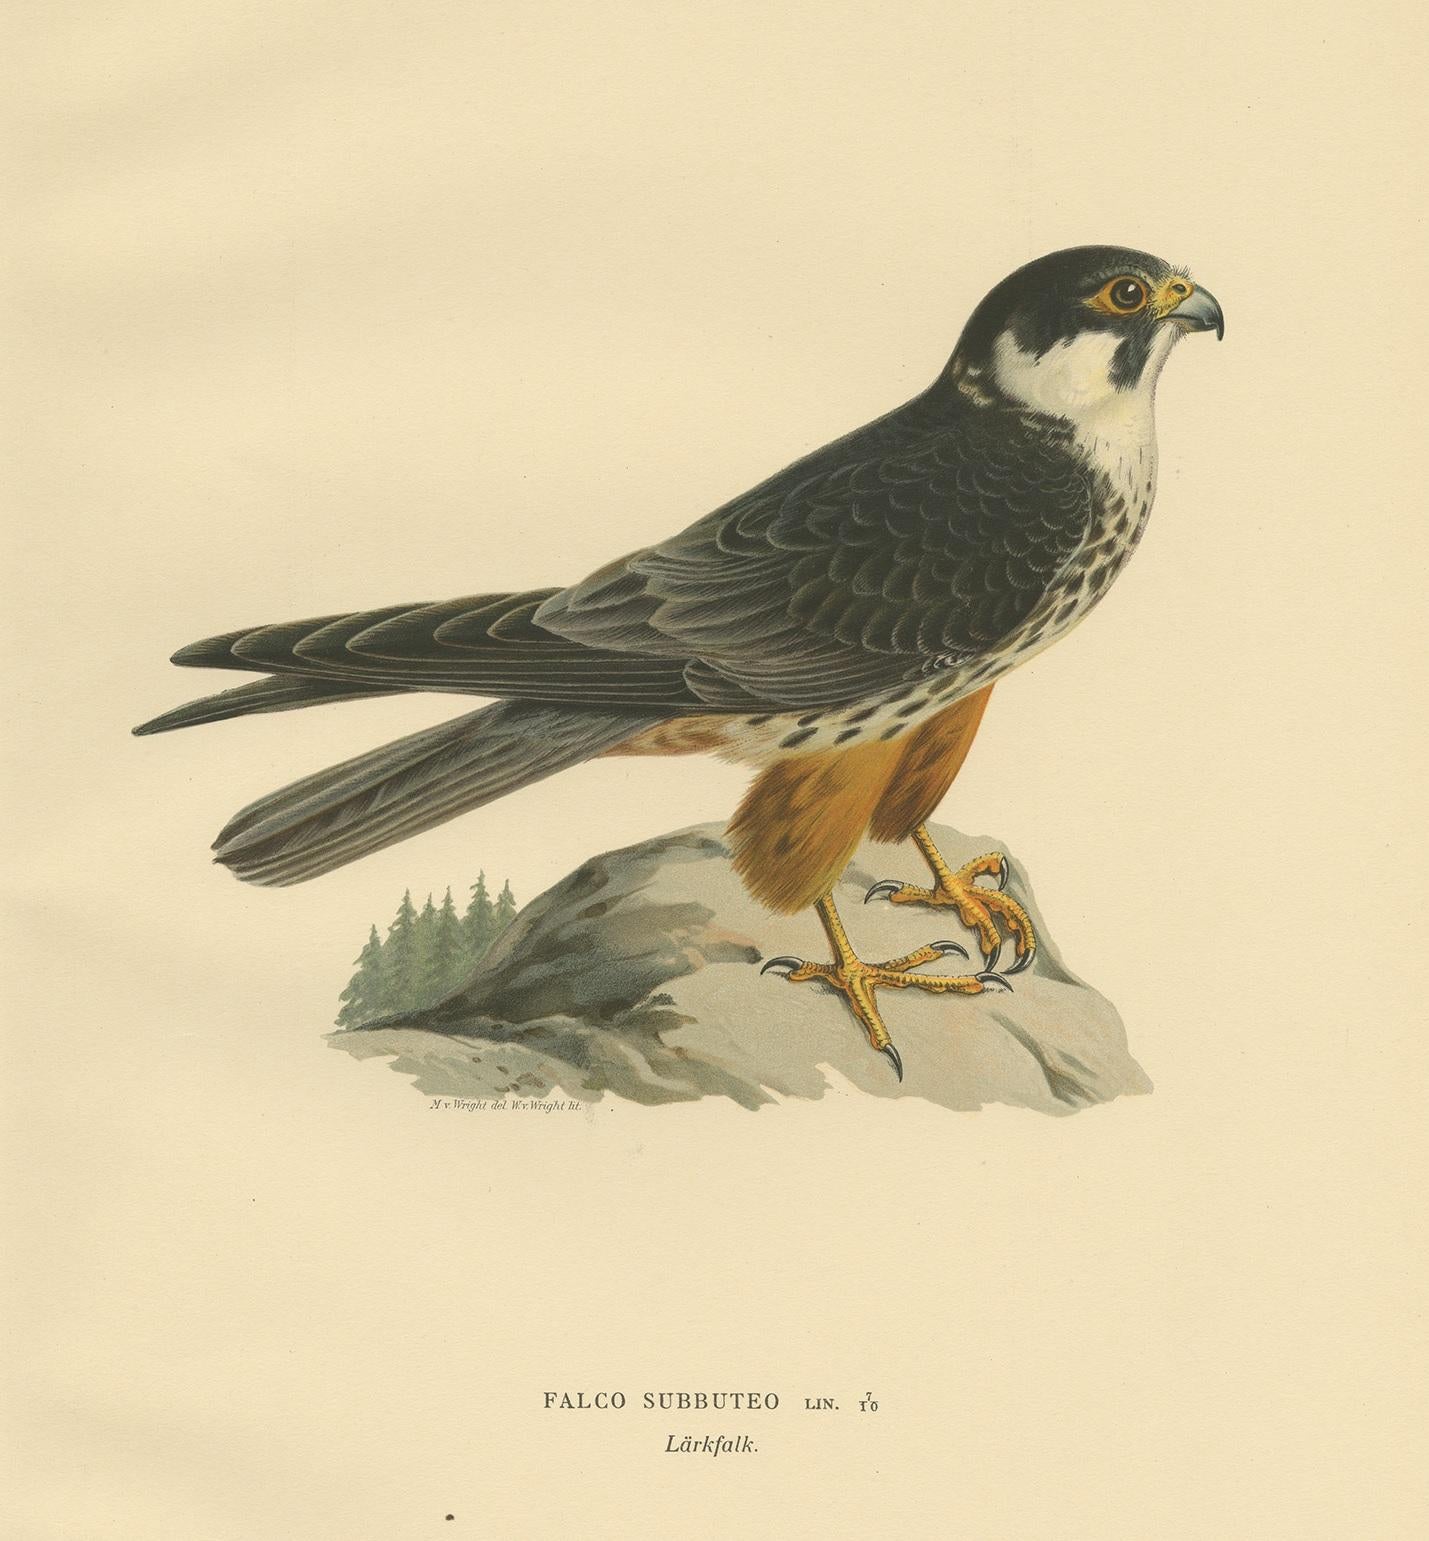 The antique bird print titled 'Falco Subbuteo' is a historical depiction of the Eurasian hobby falcon. This print is sourced from 'Svenska Foglar Efter Naturen Och Pa Stenritade,' a work by Magnus von Wright.

**Key Features of the Print:**

1.